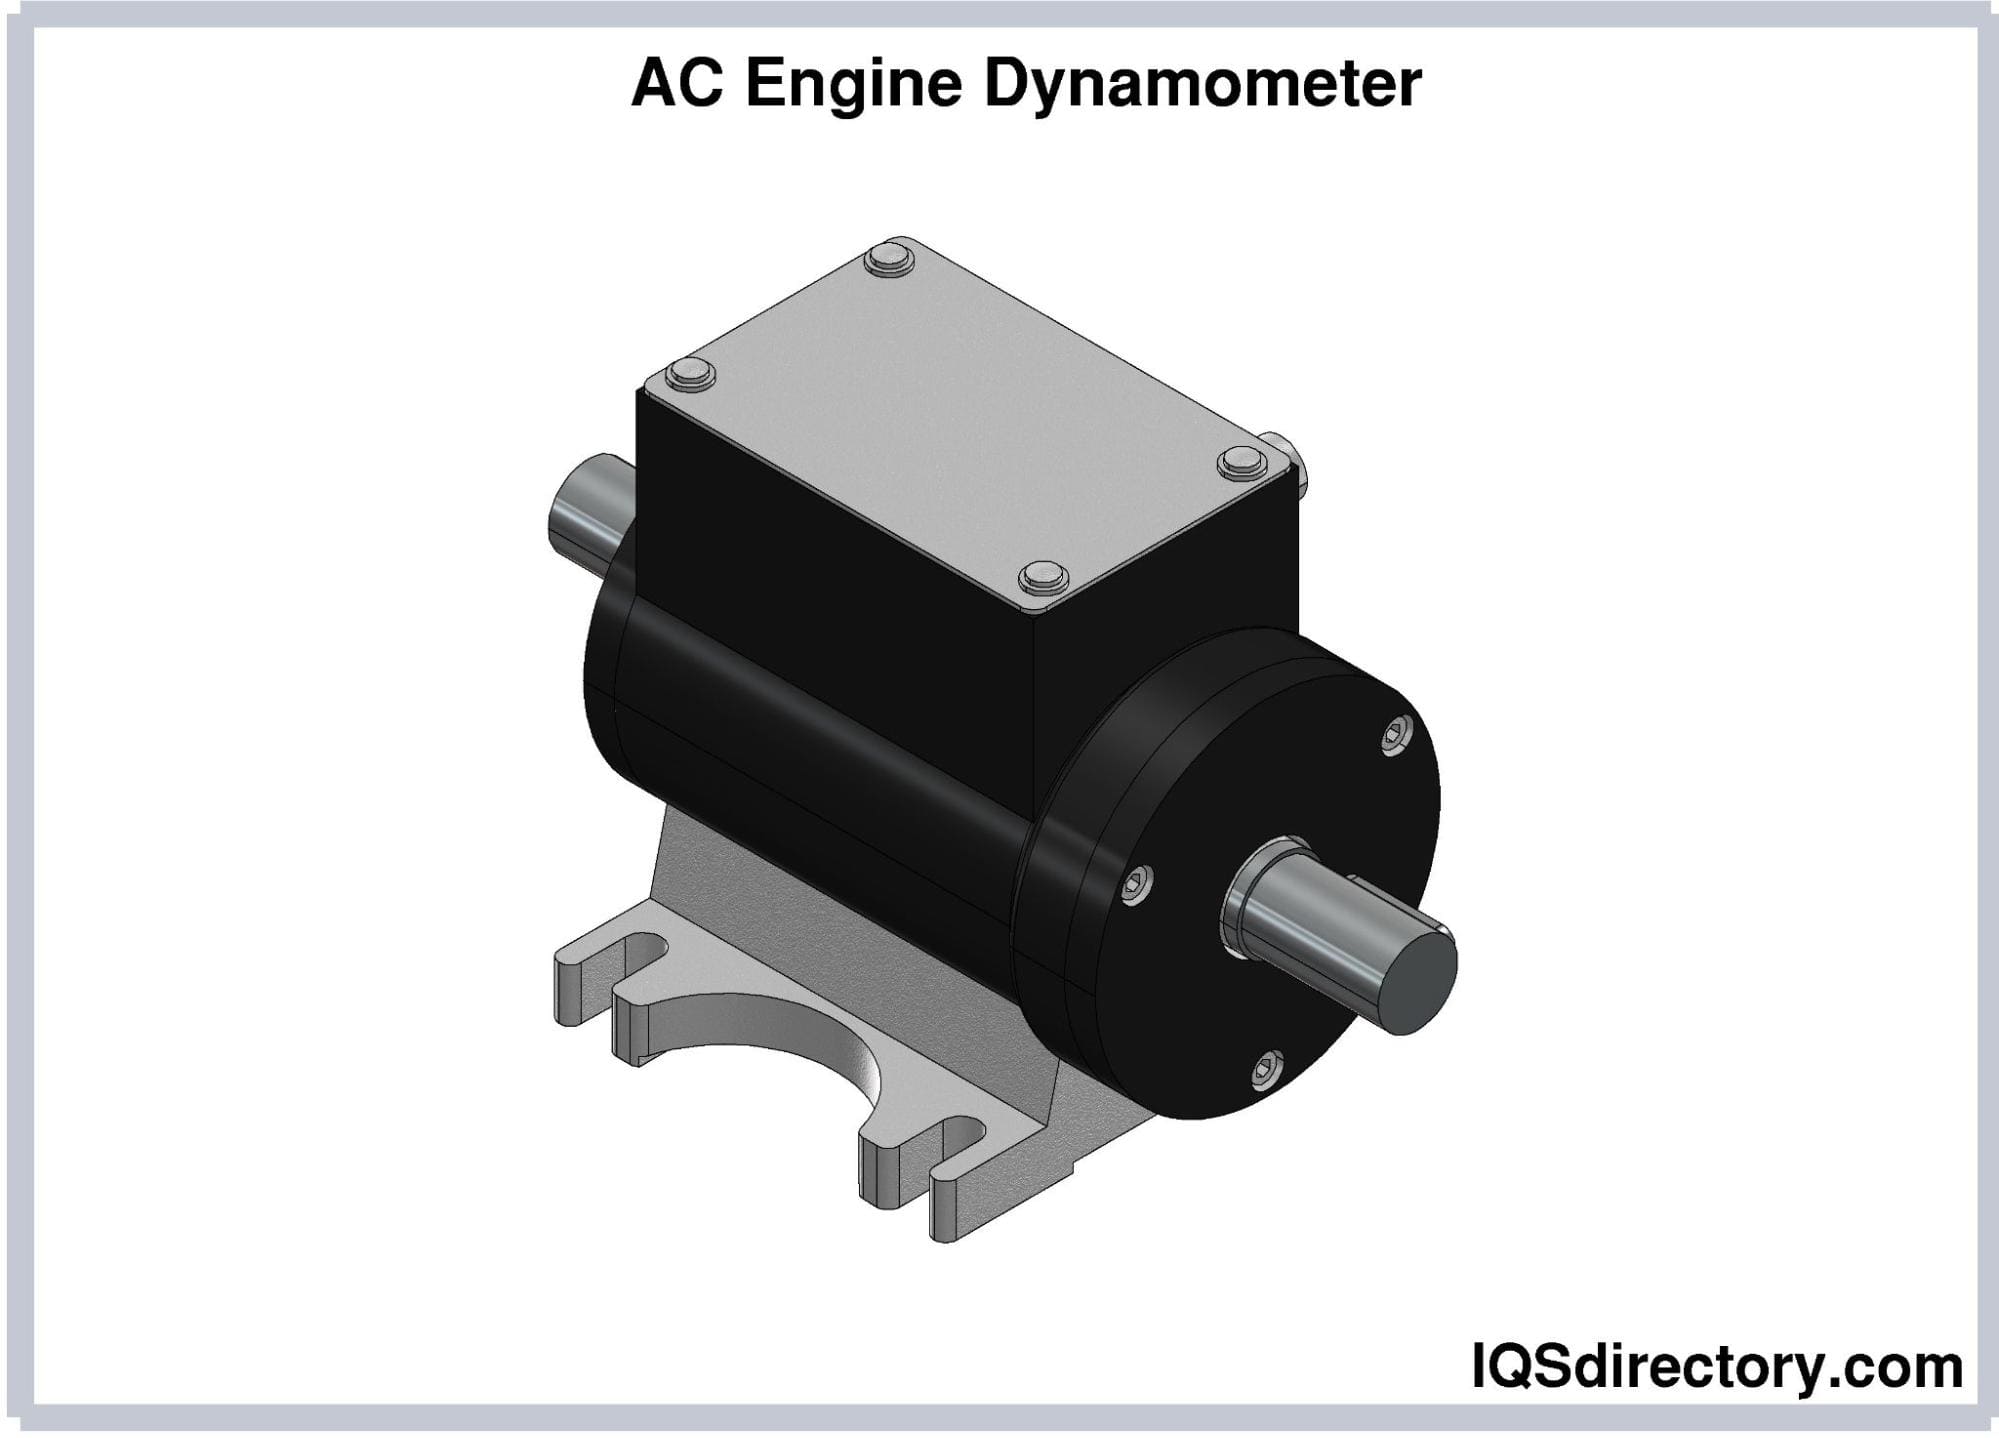 Dynamometers Dynamometer: What Is It? How Does It Work? Types, Uses